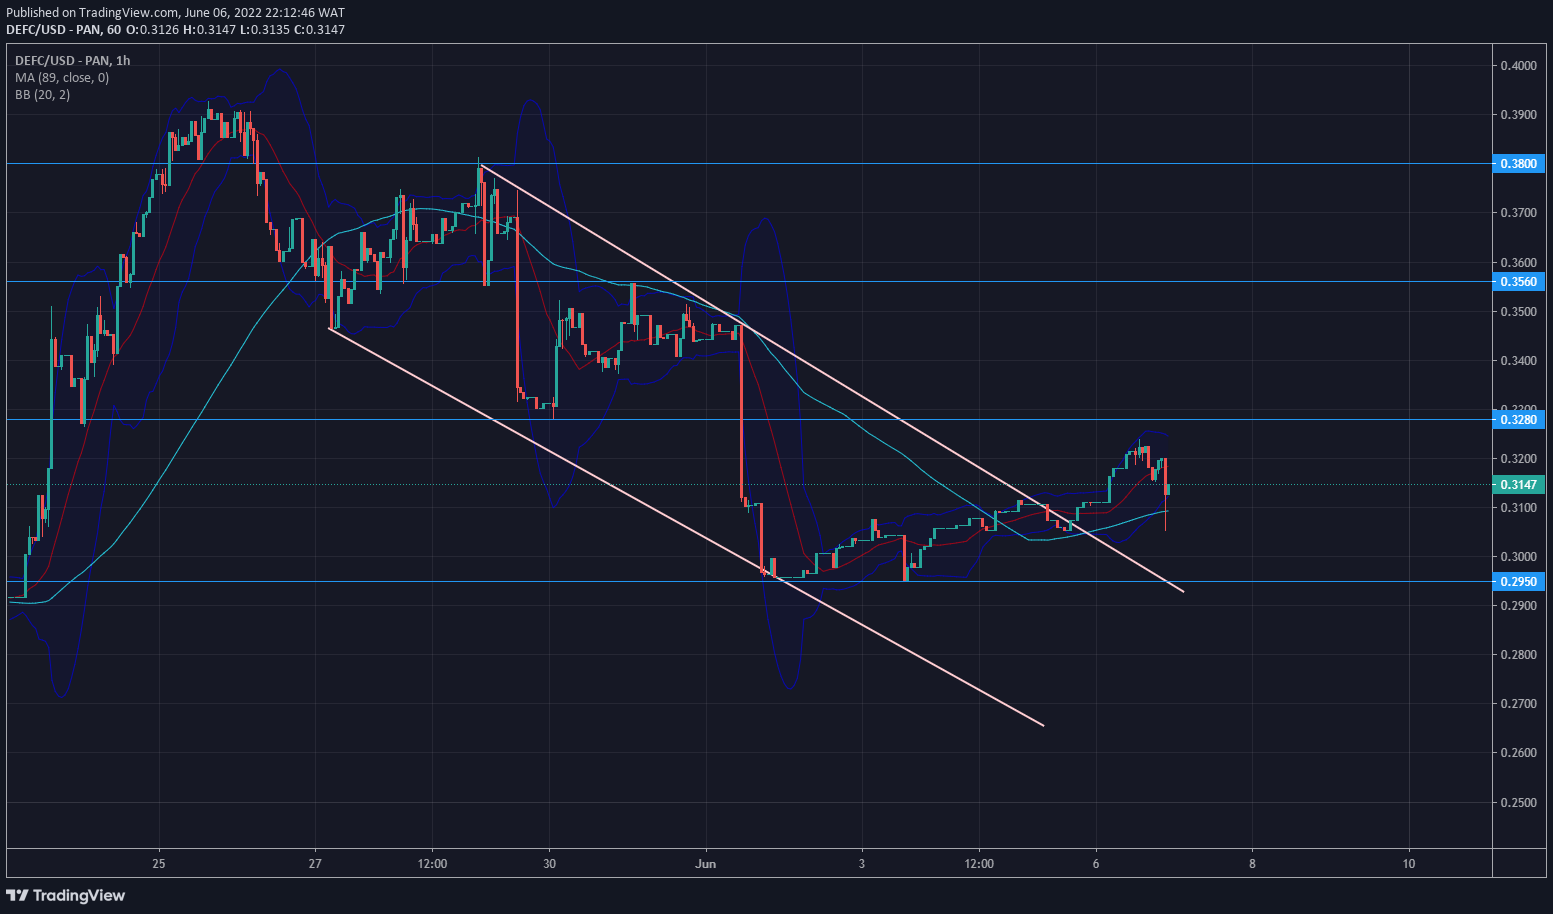 DeFI Coin Price Forecast: DeFI Coin Breaks Out of Descending Channel